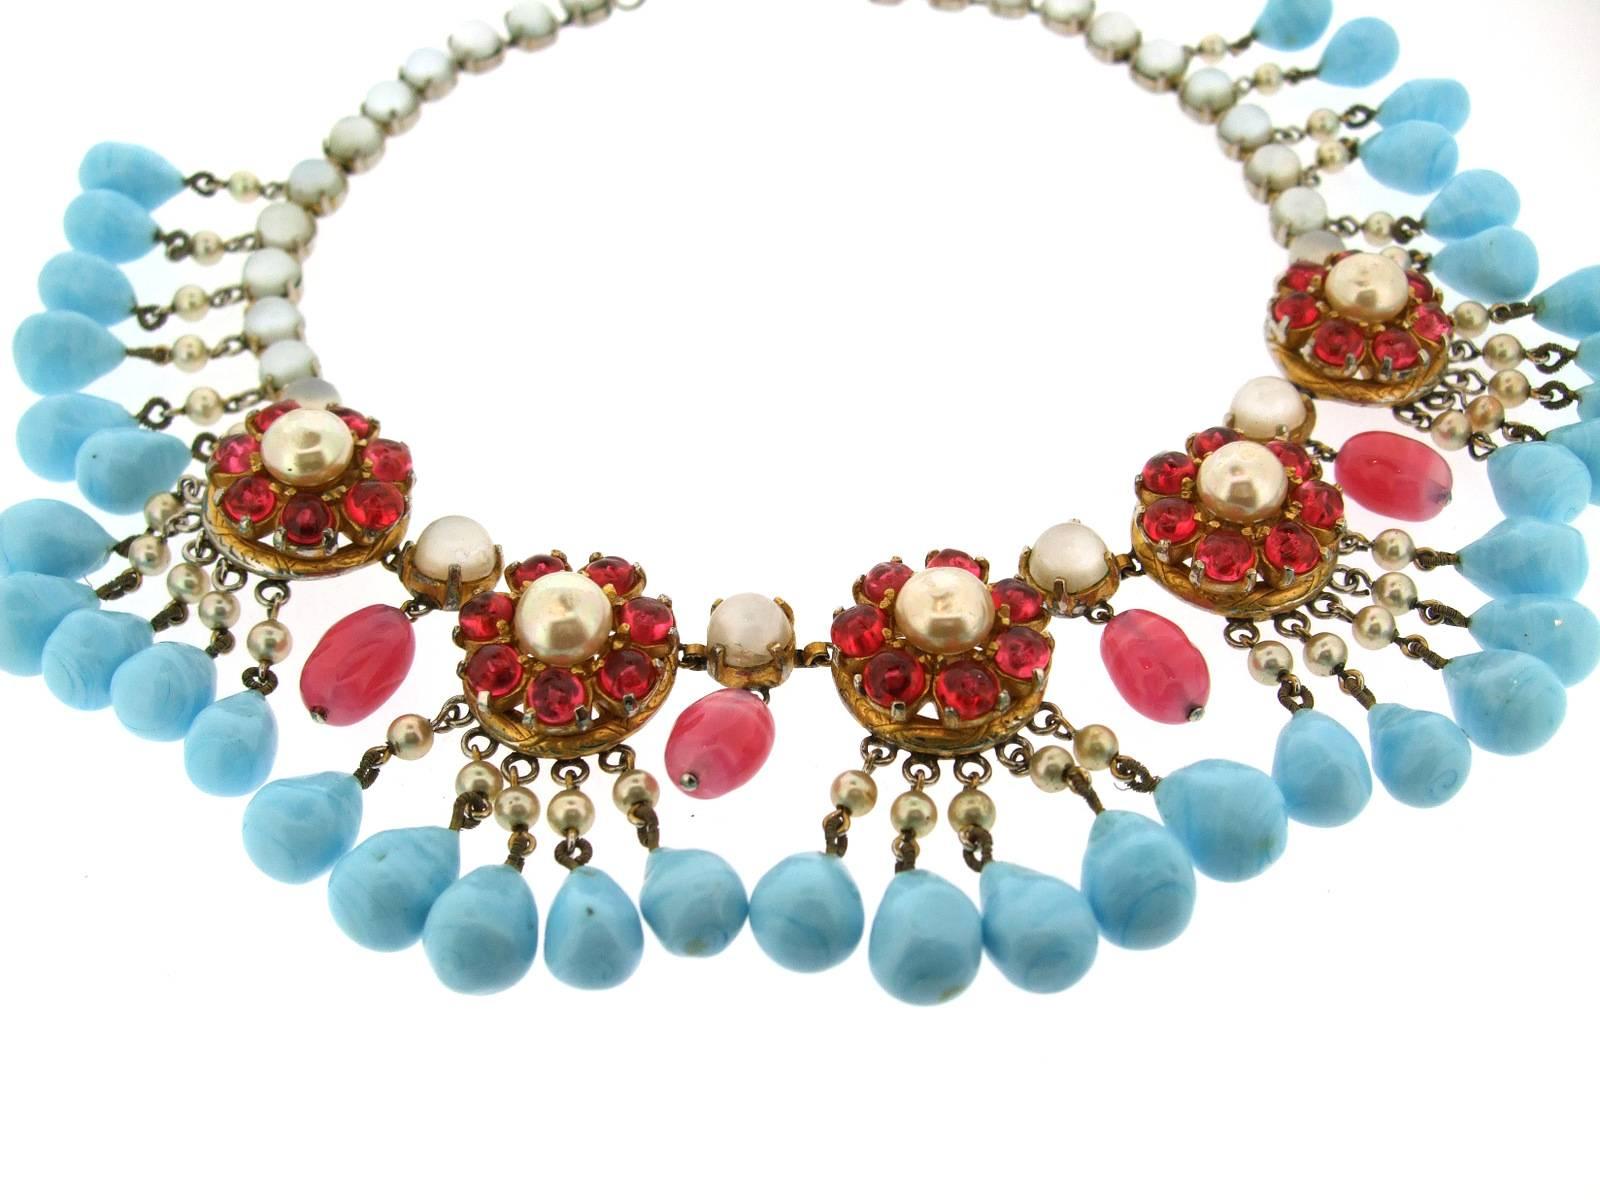 A rare collectors piece necklace by Mitchel Maer for Christian Dior from 1950. A turquoise glass fringe decorating florettes of glass rubies and glass pearls with a chain of moonstone effect stones. Silver toned costume metal.

Centre drop is 1